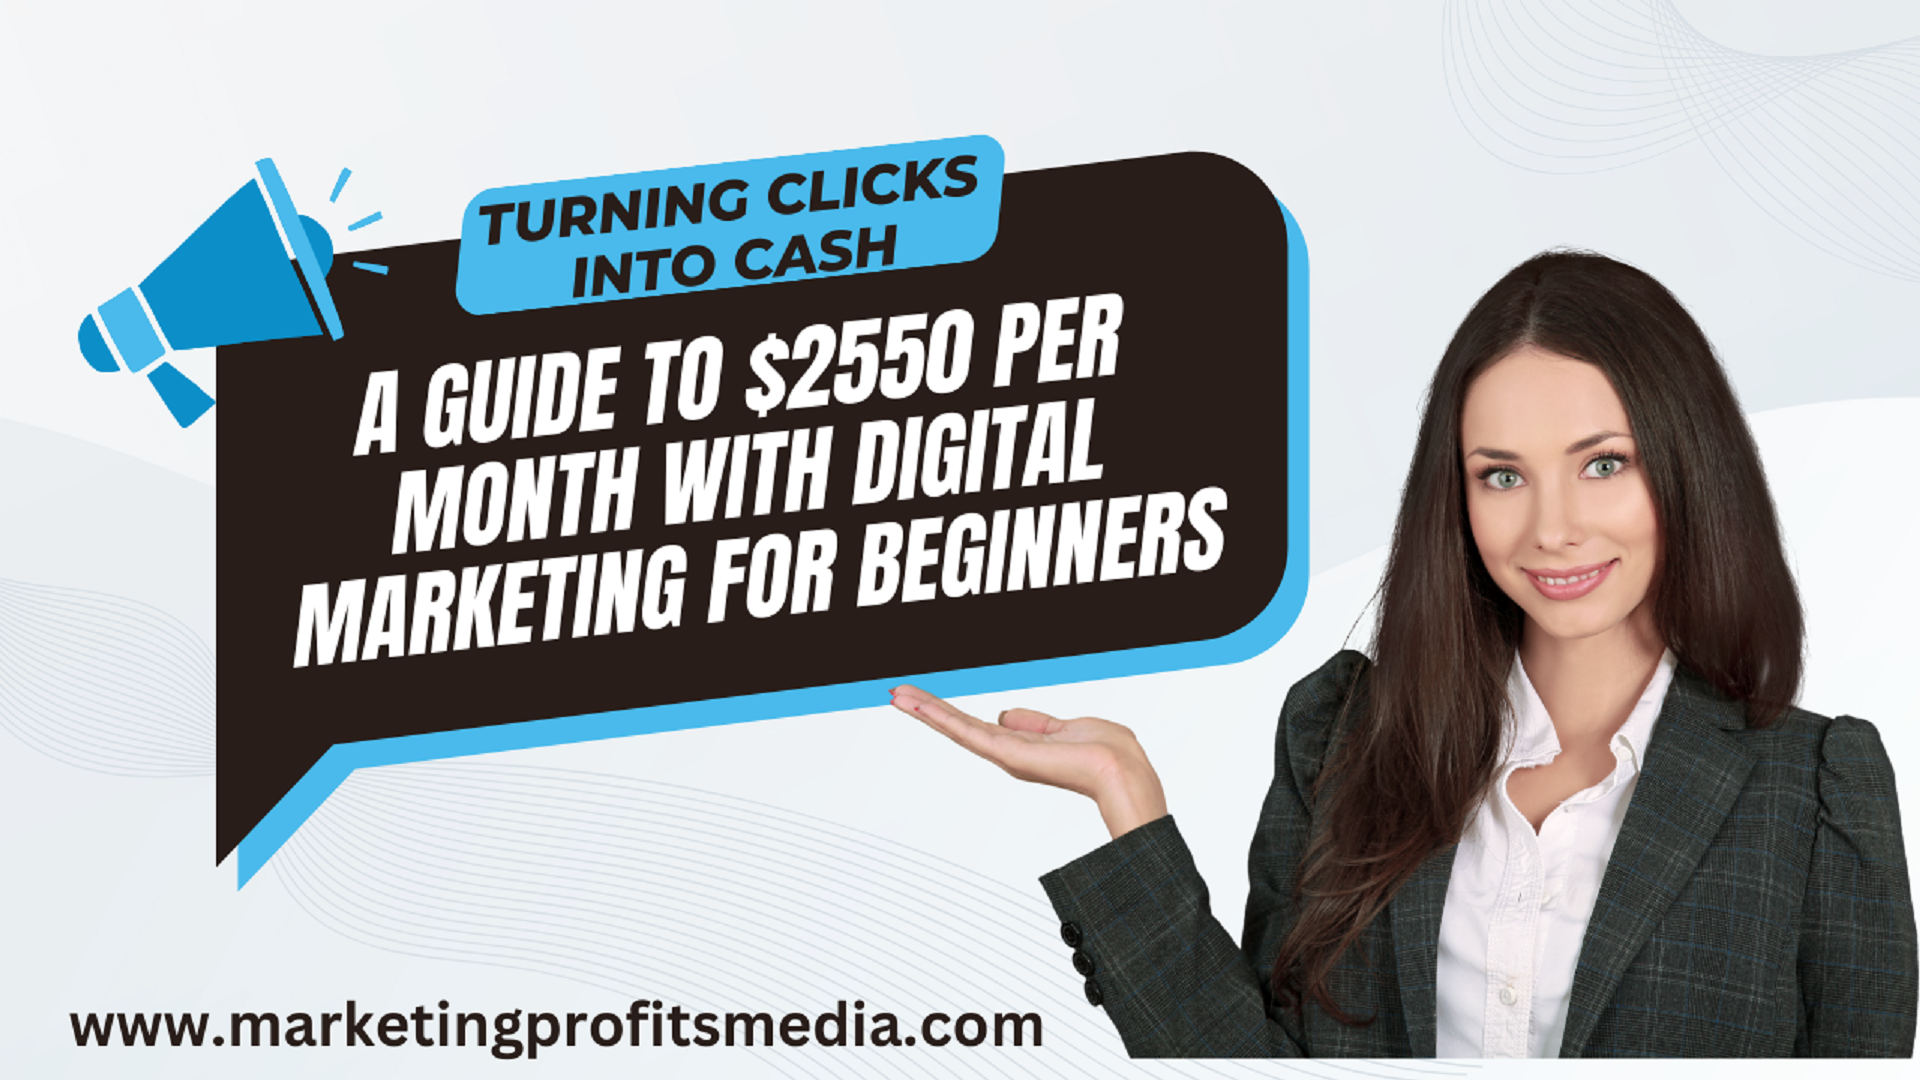 Turning Clicks into Cash: A Guide to $2550 Per Month With Digital Marketing for Beginners